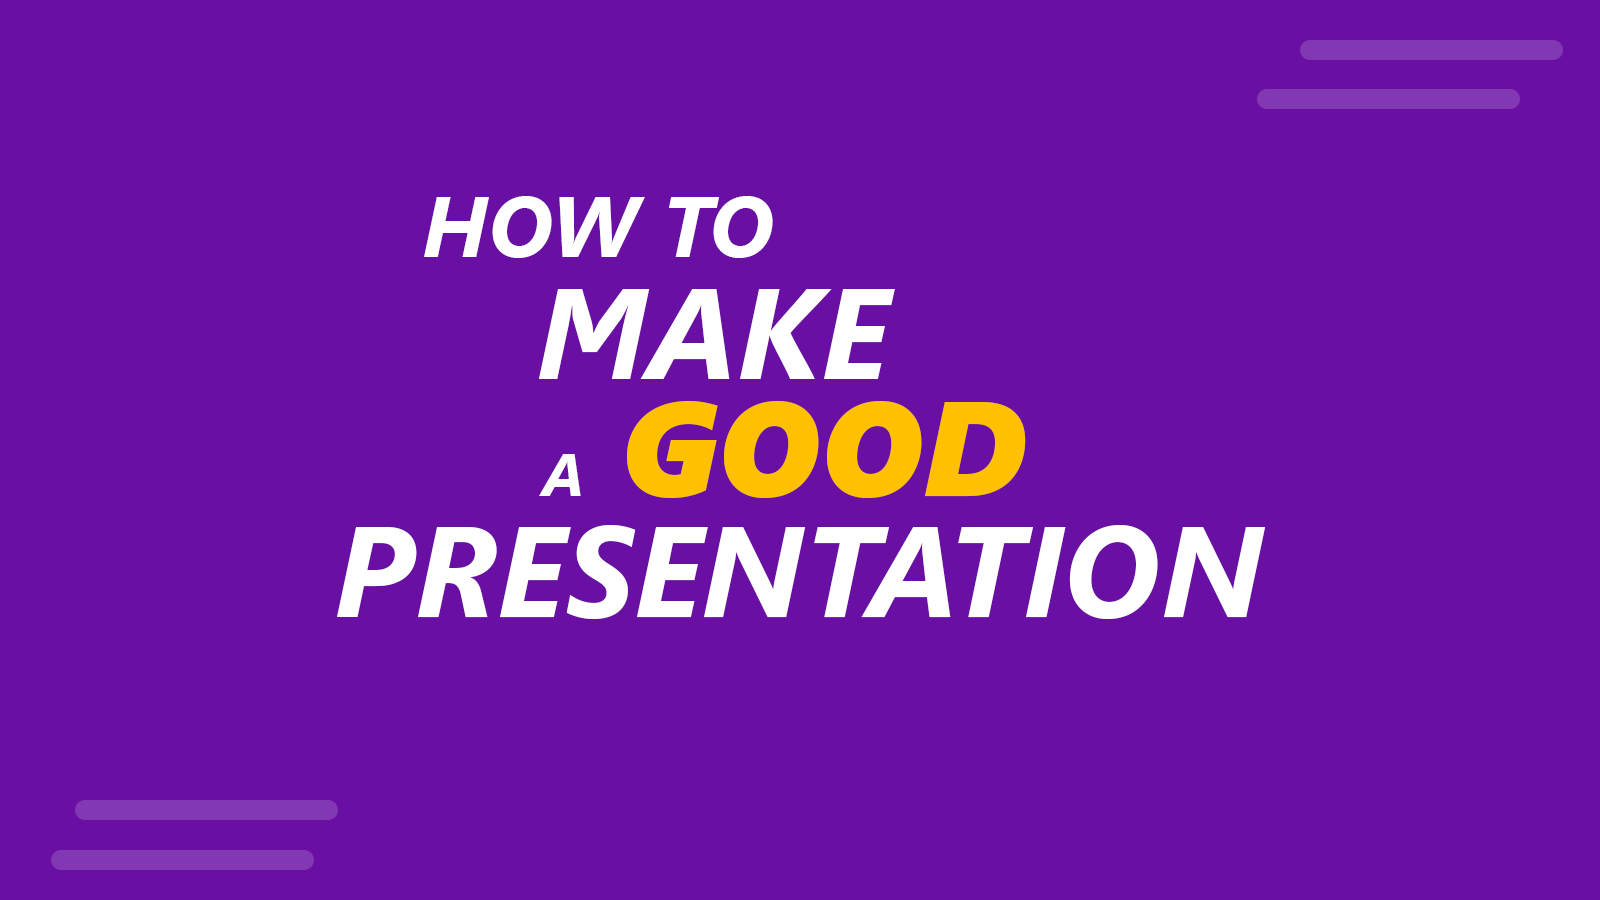 your presentation was well planned